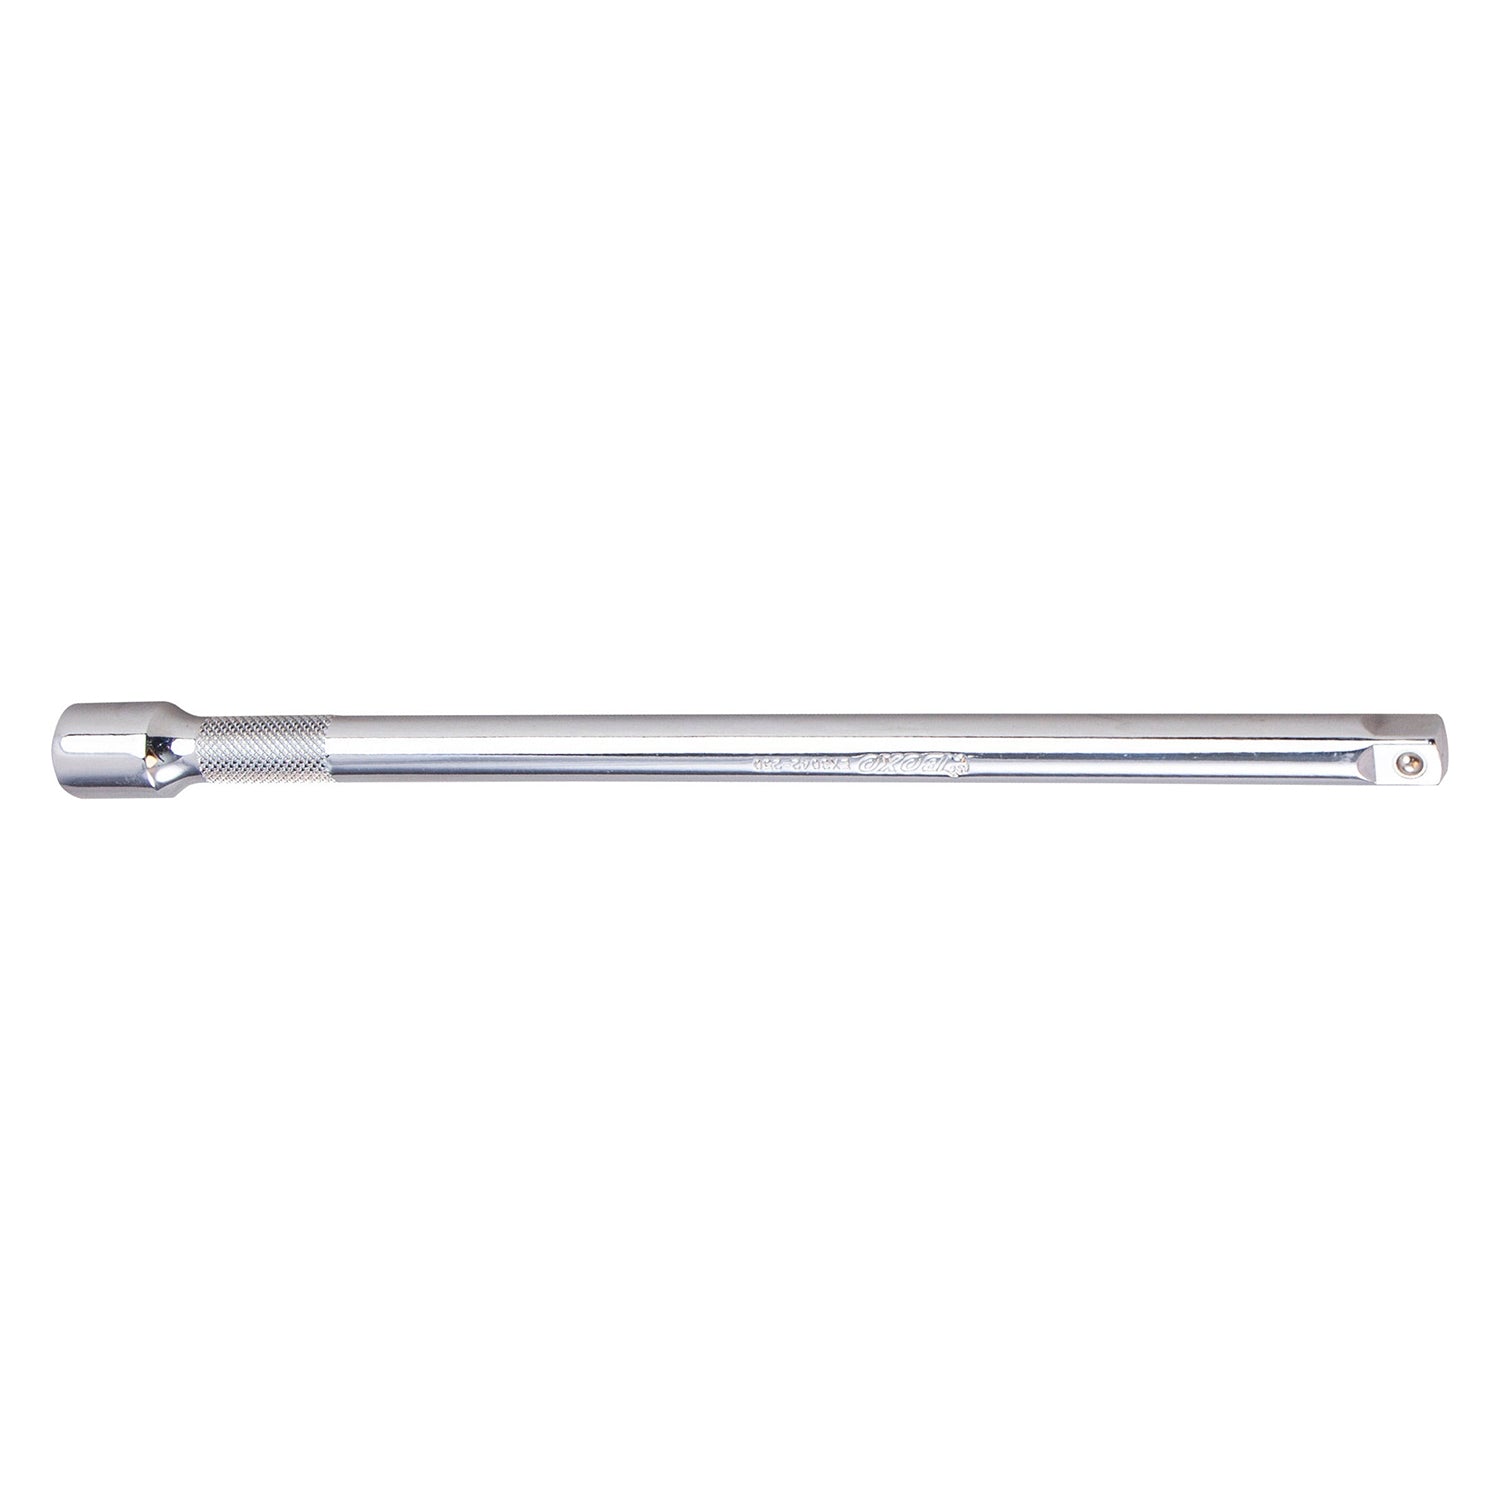 BOXO 1/4" Extension Bars - Sizes 50 to 200mm